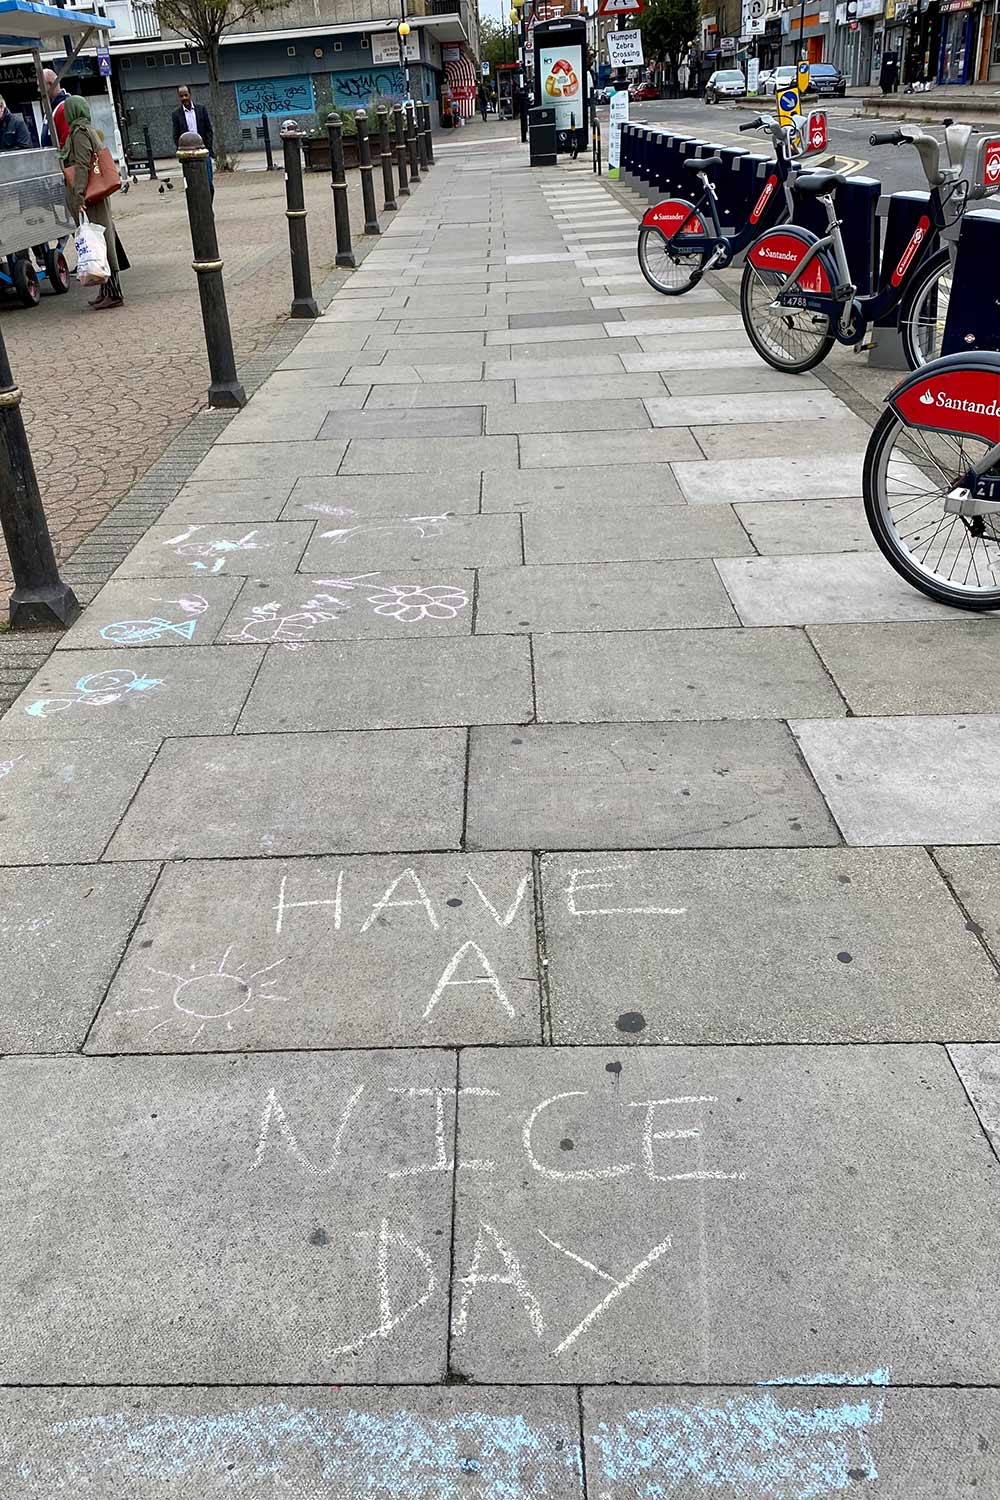 'have a nice day' chalked onto pavement in globe town